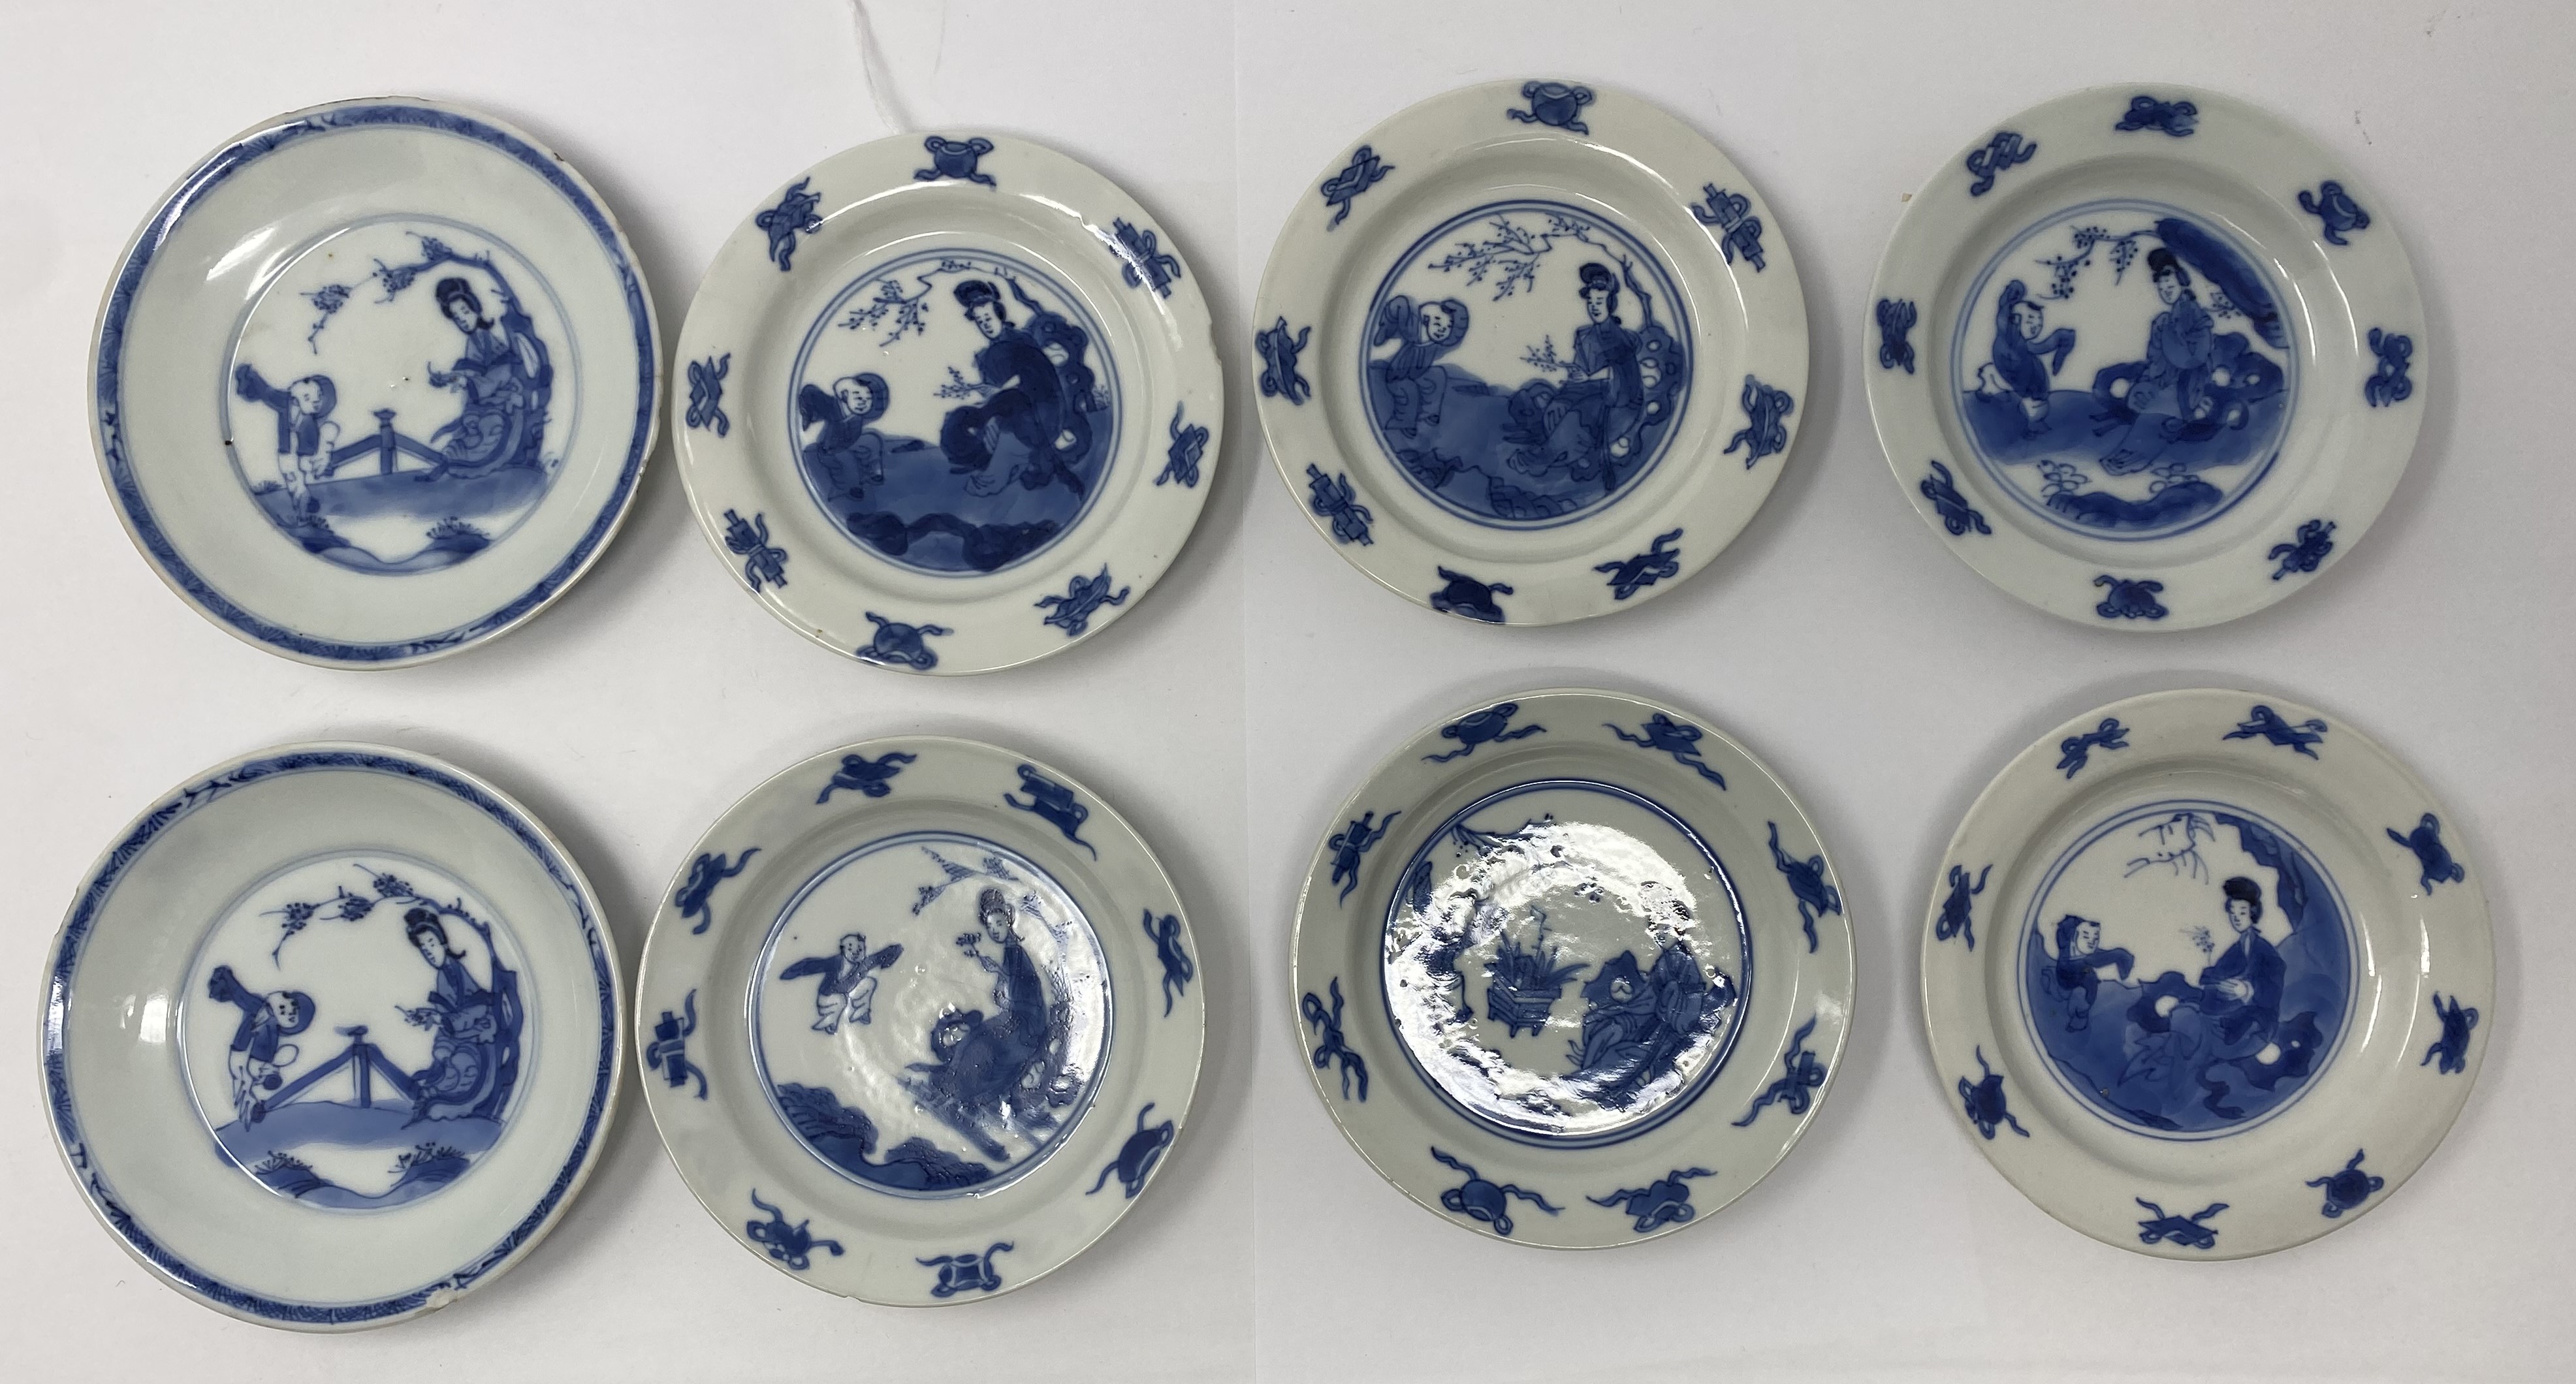 SIX SMALL MATCHED CHINESE BLUE AND WHITE DISHES, KANGXI PERIOD (1662-1722) - Image 2 of 4